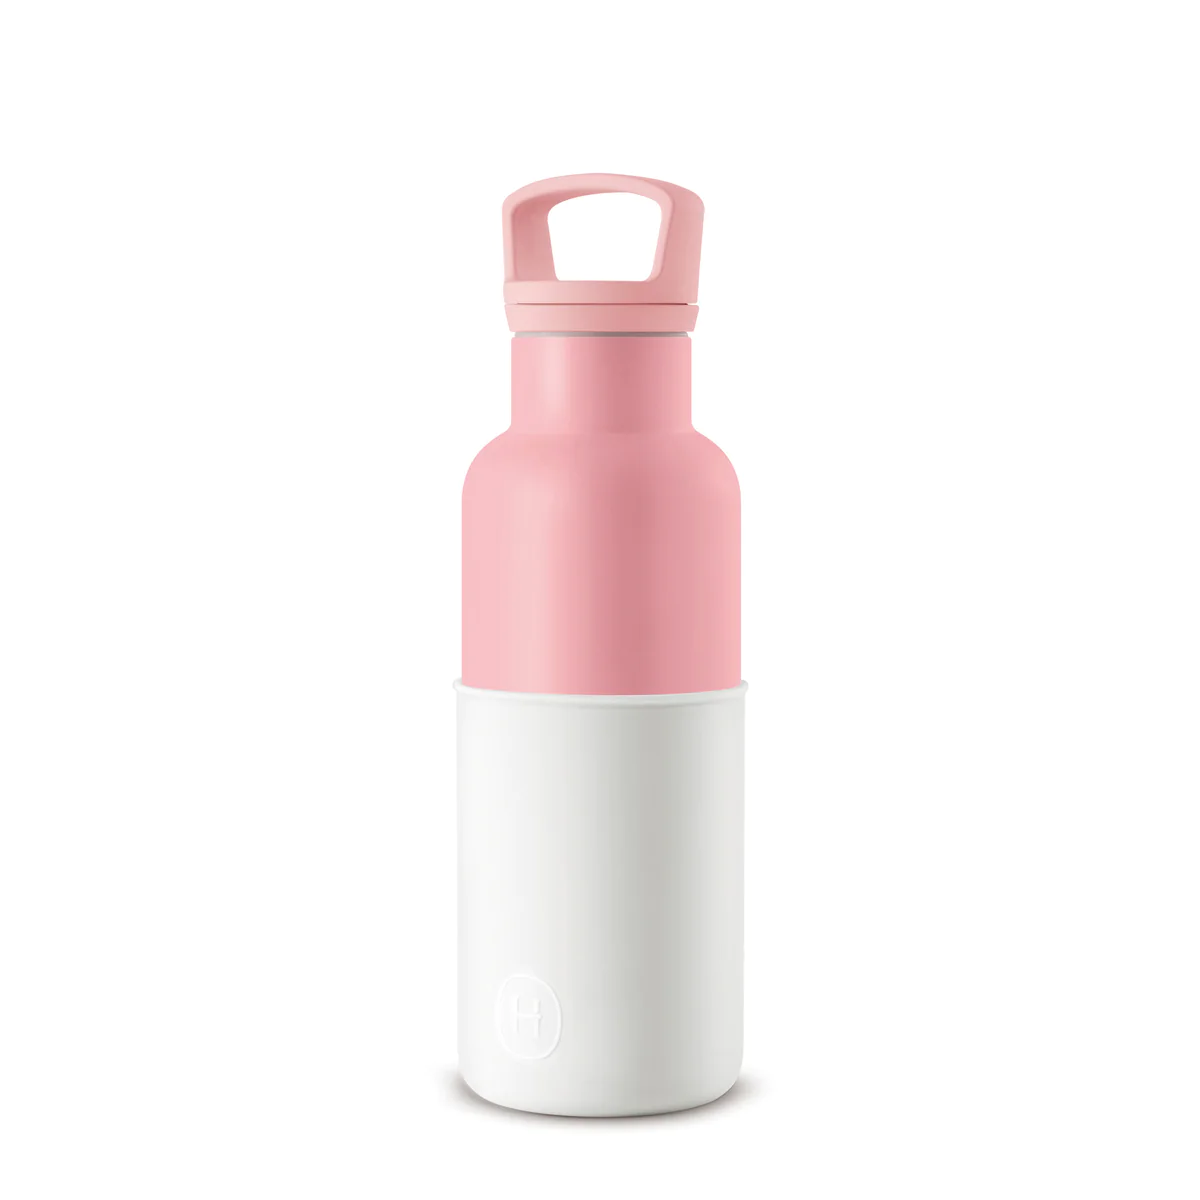 Miniland 89217 Liquid Thermos of 350ml with rubbery Exterior Rose Rose  Single